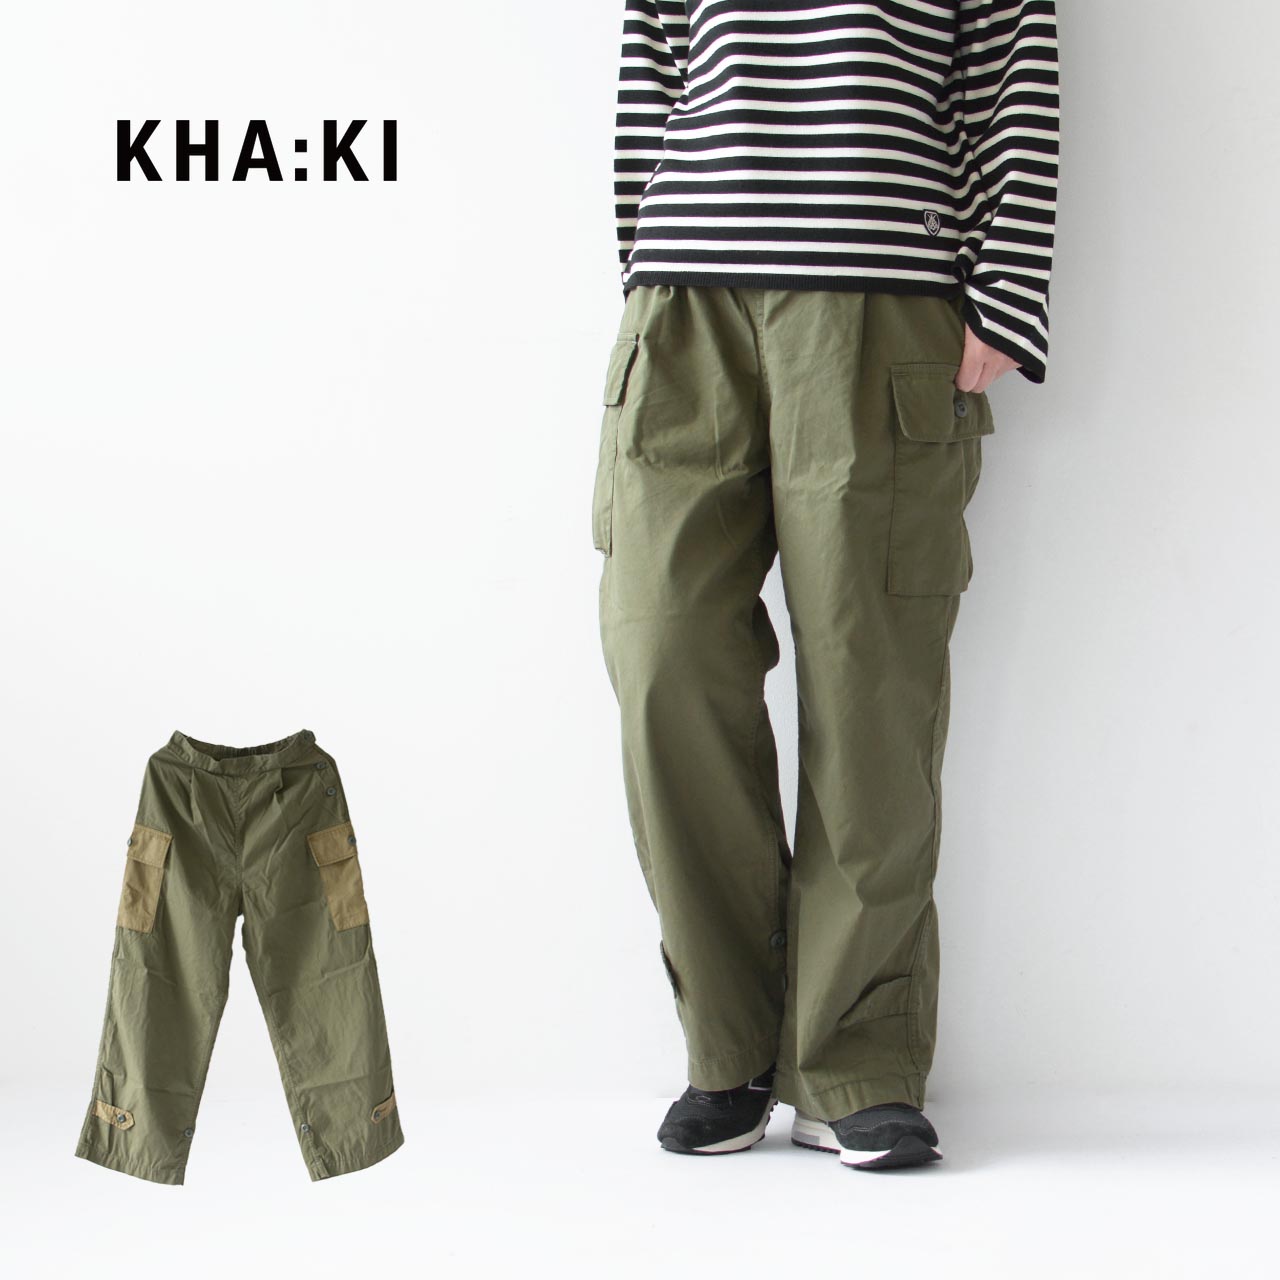 【SALE 30%OFF】KHA:KI [カーキ] 2 POCKETS WIDE TROUSERS [MIL23FPT3190] 2ポケットワイドトラウザーズ・カーゴパンツ・ミリタリー・ワイドストレート・LADY'S [2023AW]